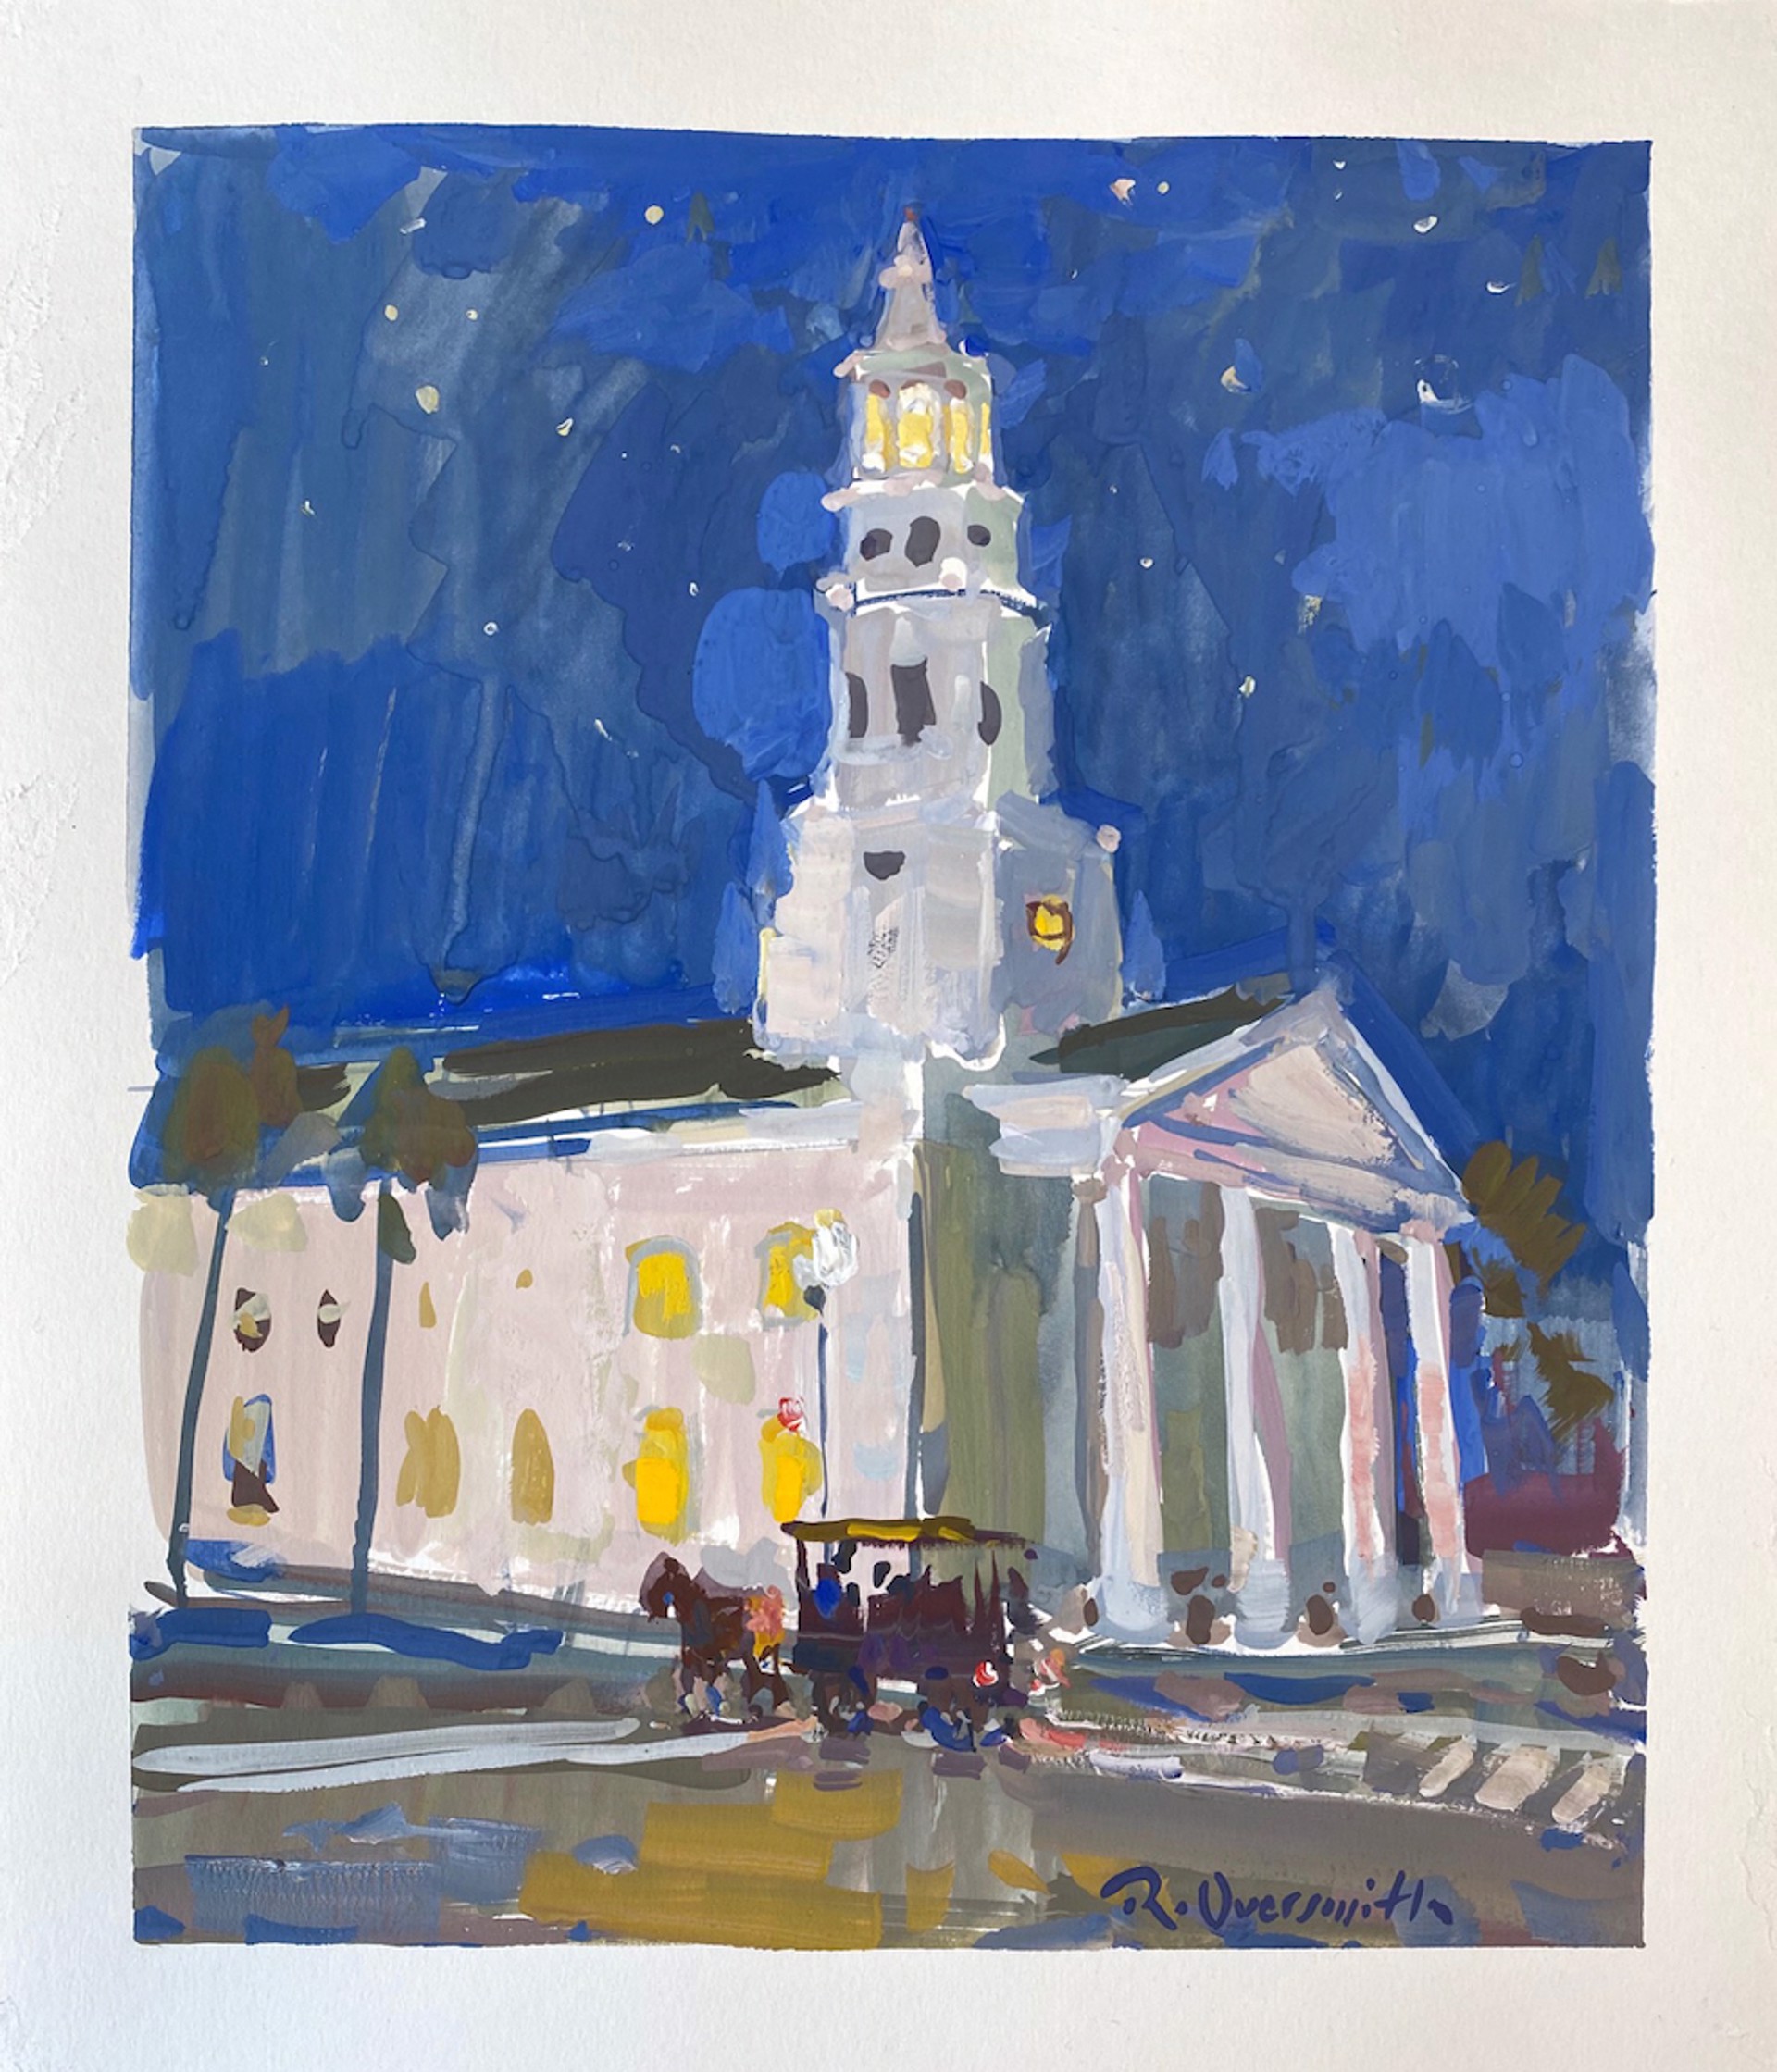 St. Michael's at Night by Richard Oversmith